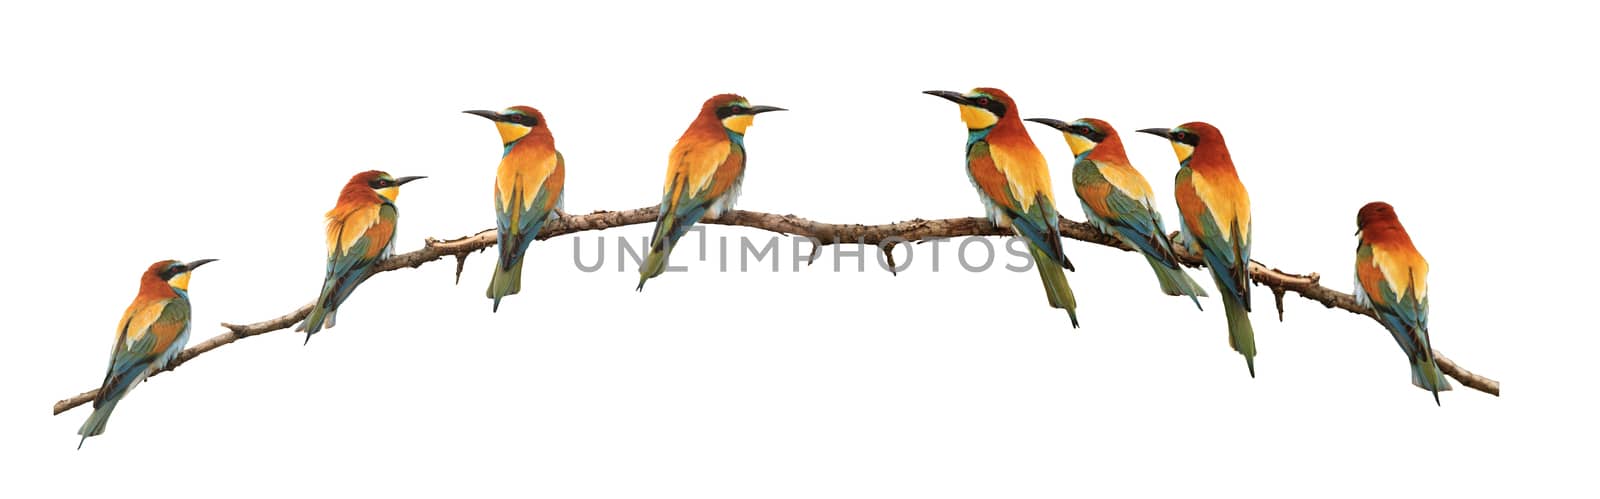 set of bee-eaters sitting on a branch isolated on white,birds of paradise, bee-eaters, rainbow colors, a group of birds. flock